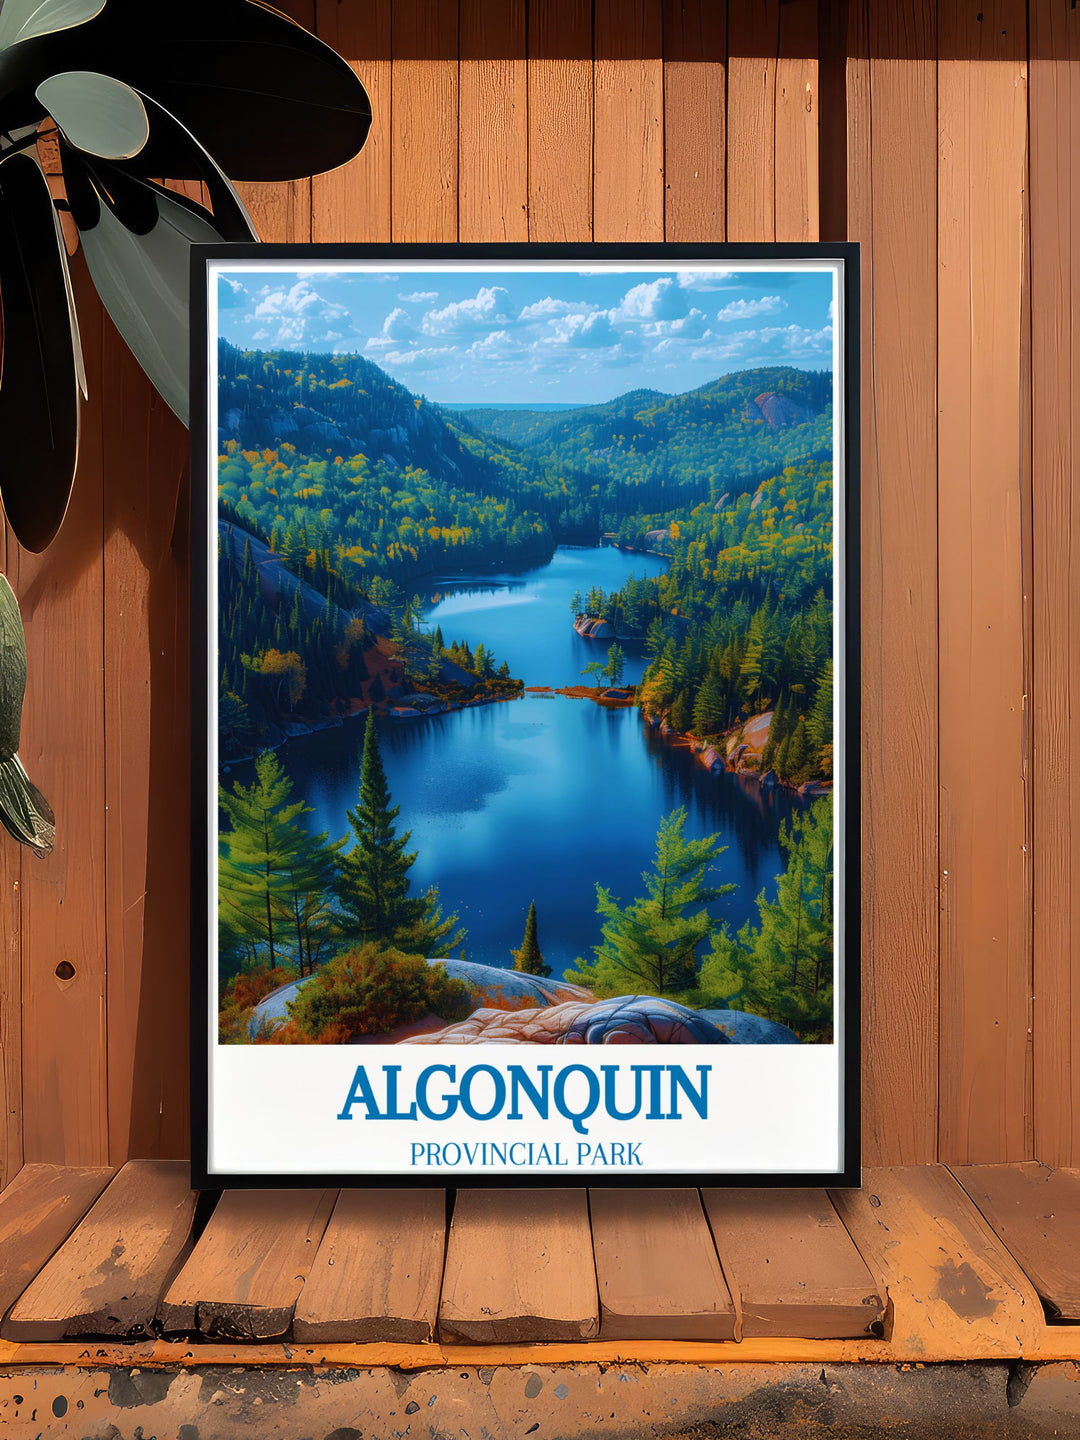 Canvas art of Algonquin Provincial Park showcases the parks vast forests and tranquil lakes, designed to bring a piece of Canadas natural beauty into your living space.